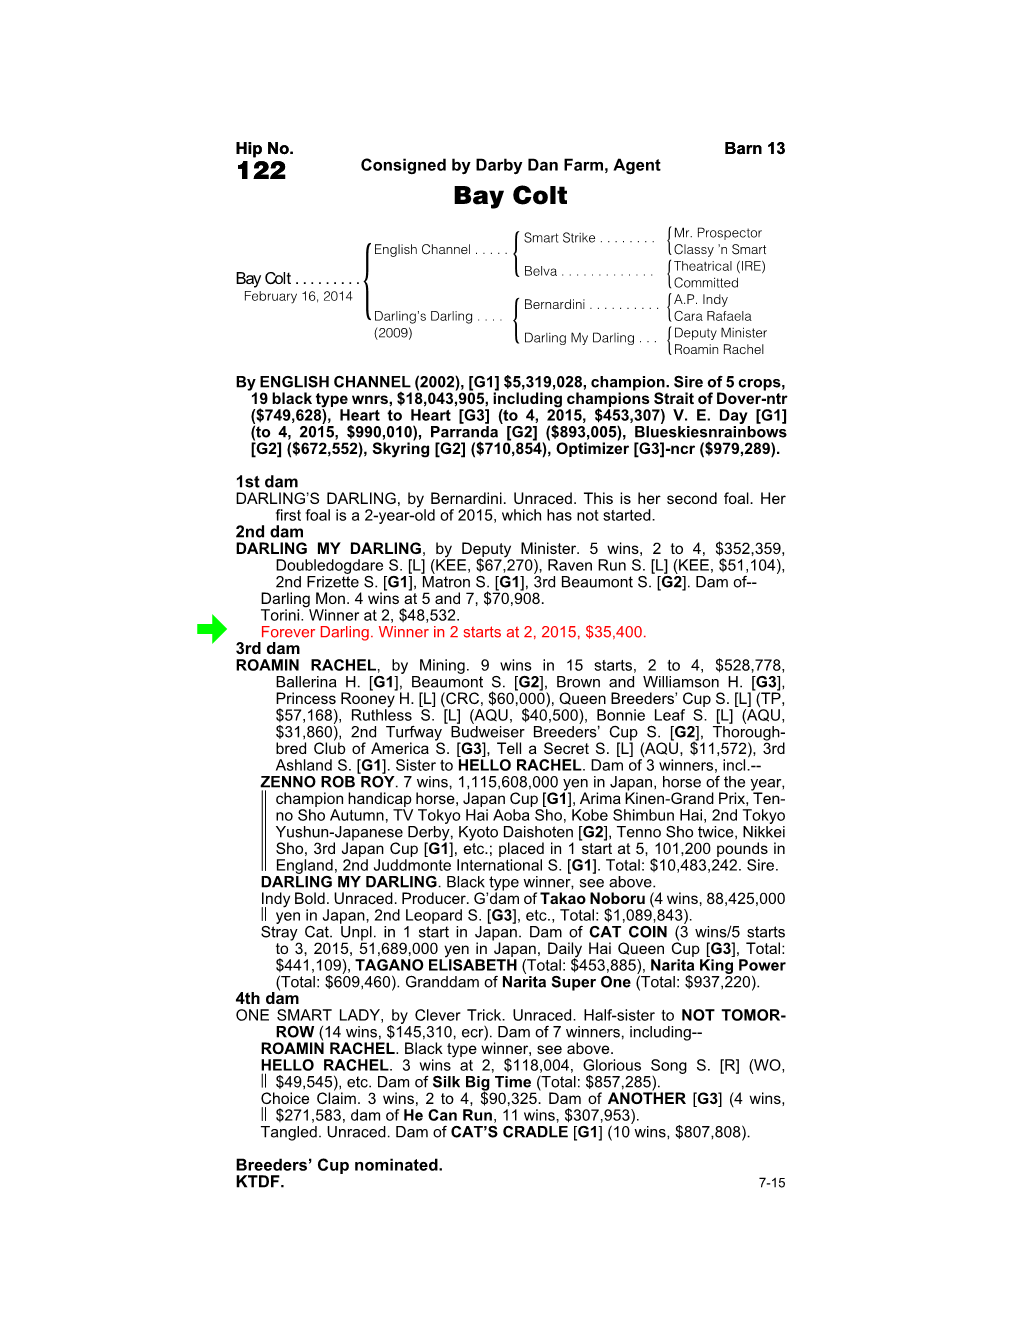 122 Consigned by Darby Dan Farm, Agent Bay Colt